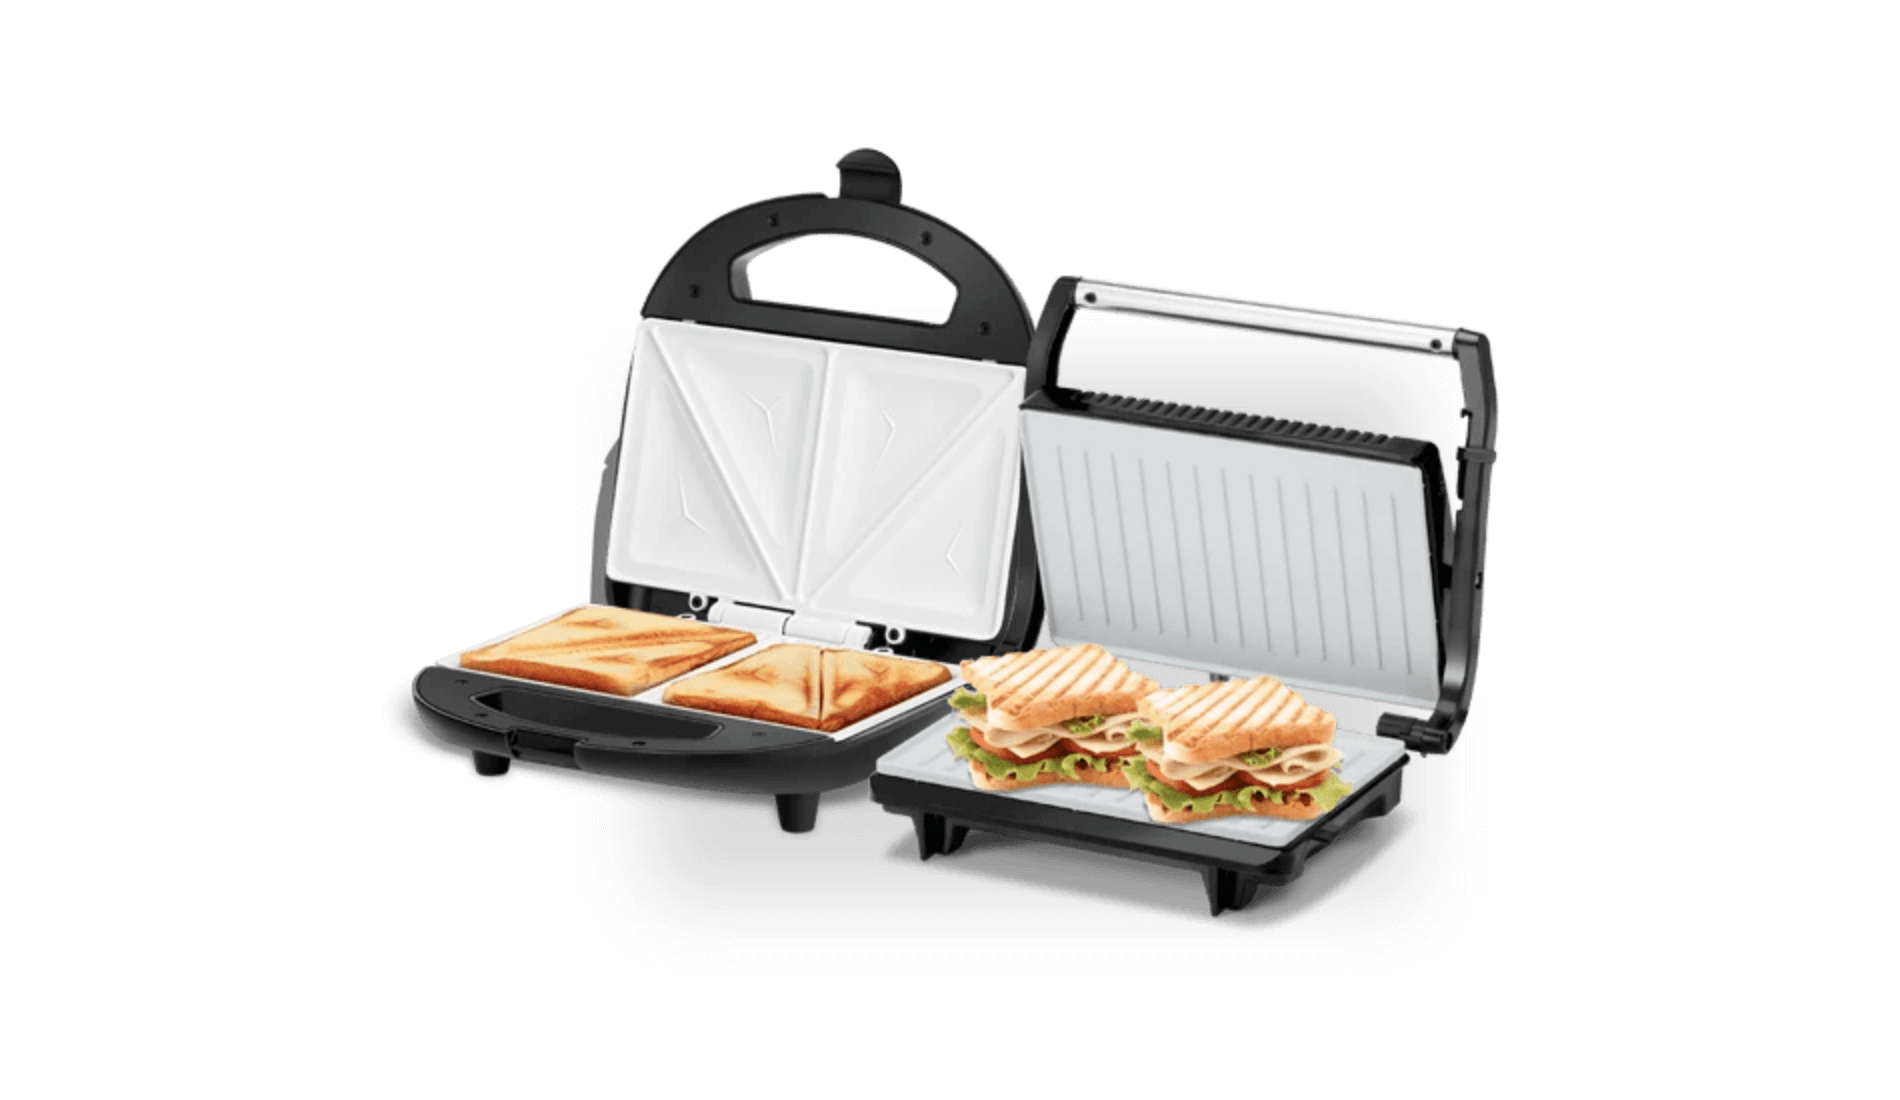 https://www.kent.co.in/images/kitchen-appliances/sandwich-grill/sandwich-toaster-banner.png